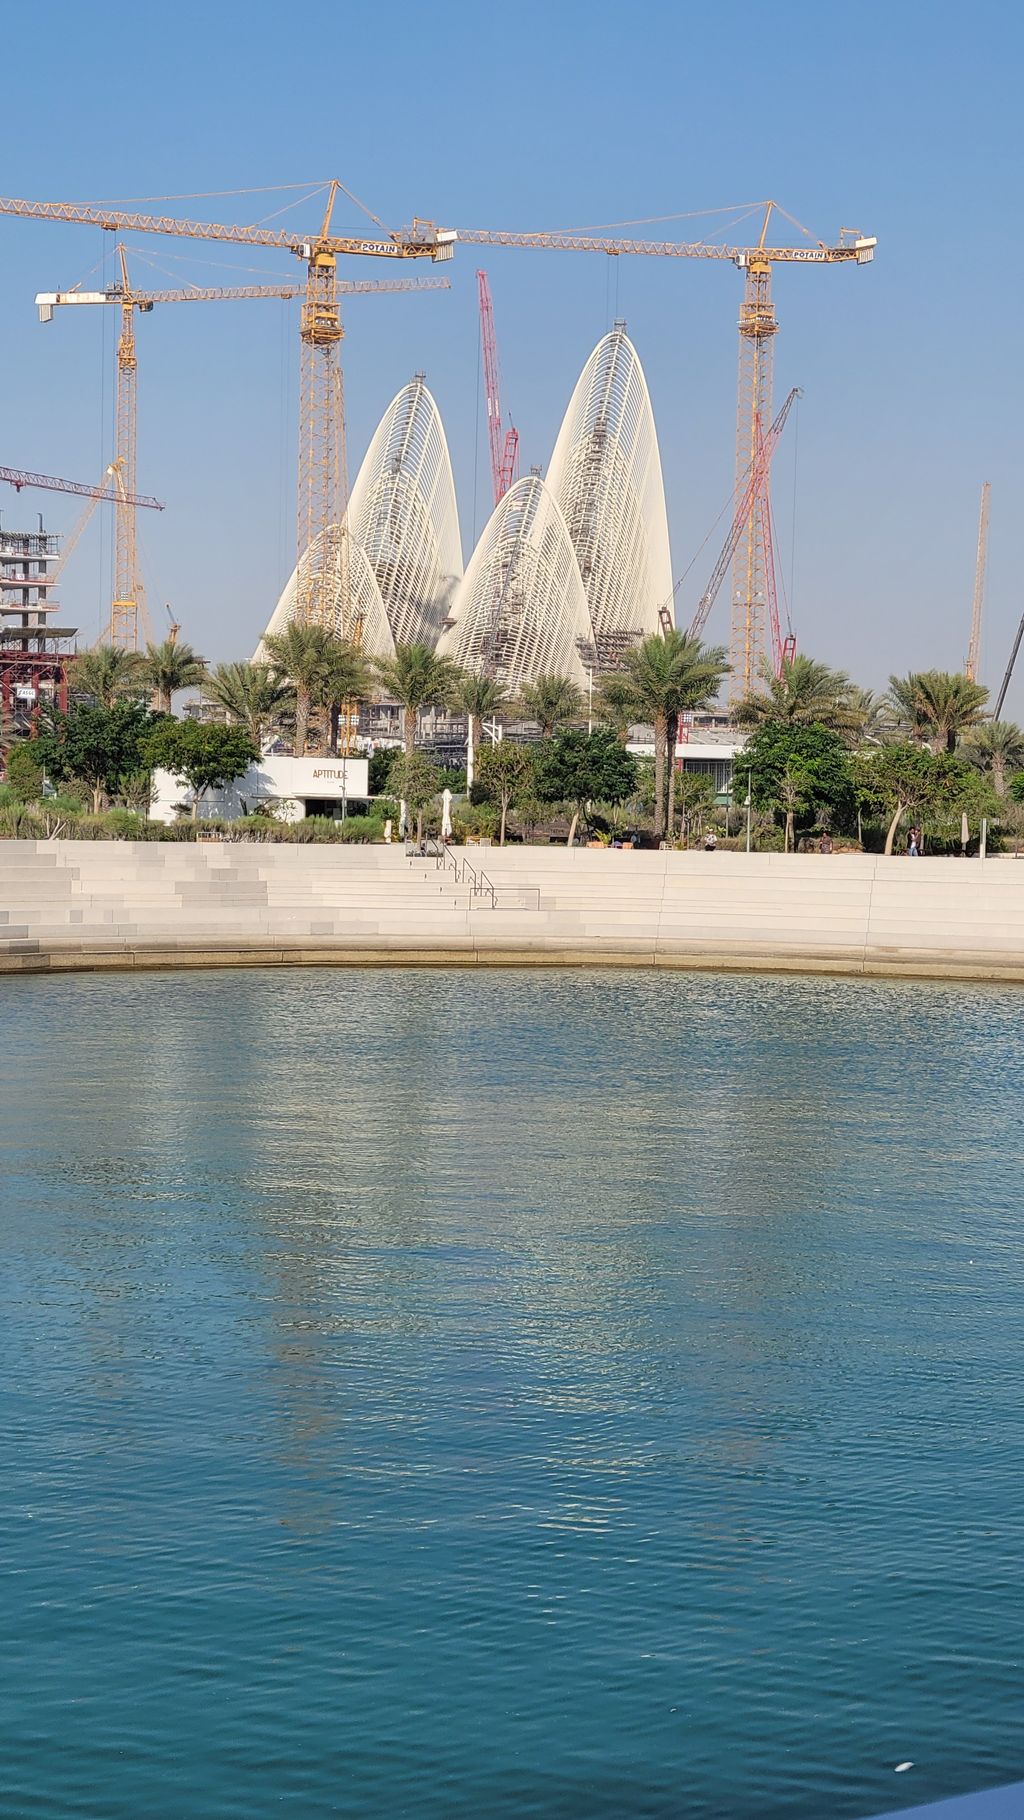 Zayed National Museum (Under Construction)